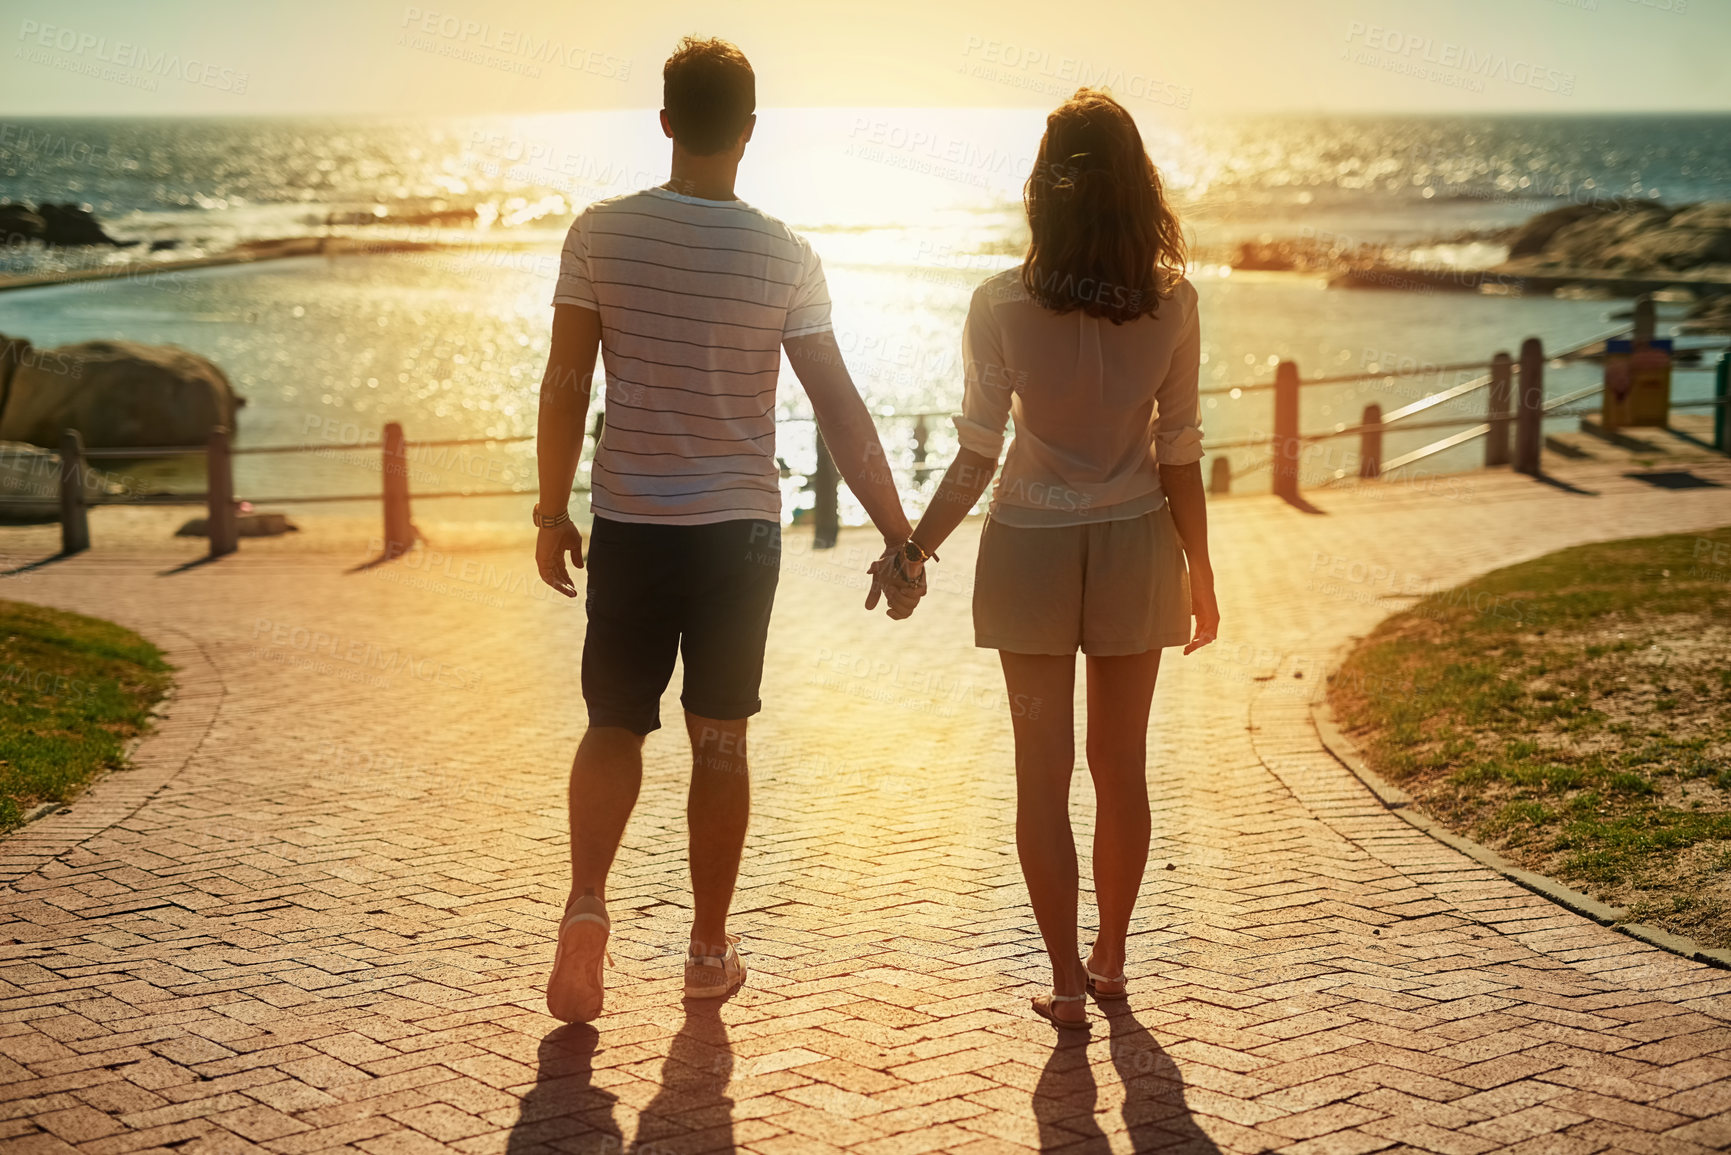 Buy stock photo Rearview shot of a young couple watching the sunset at the coast during summer